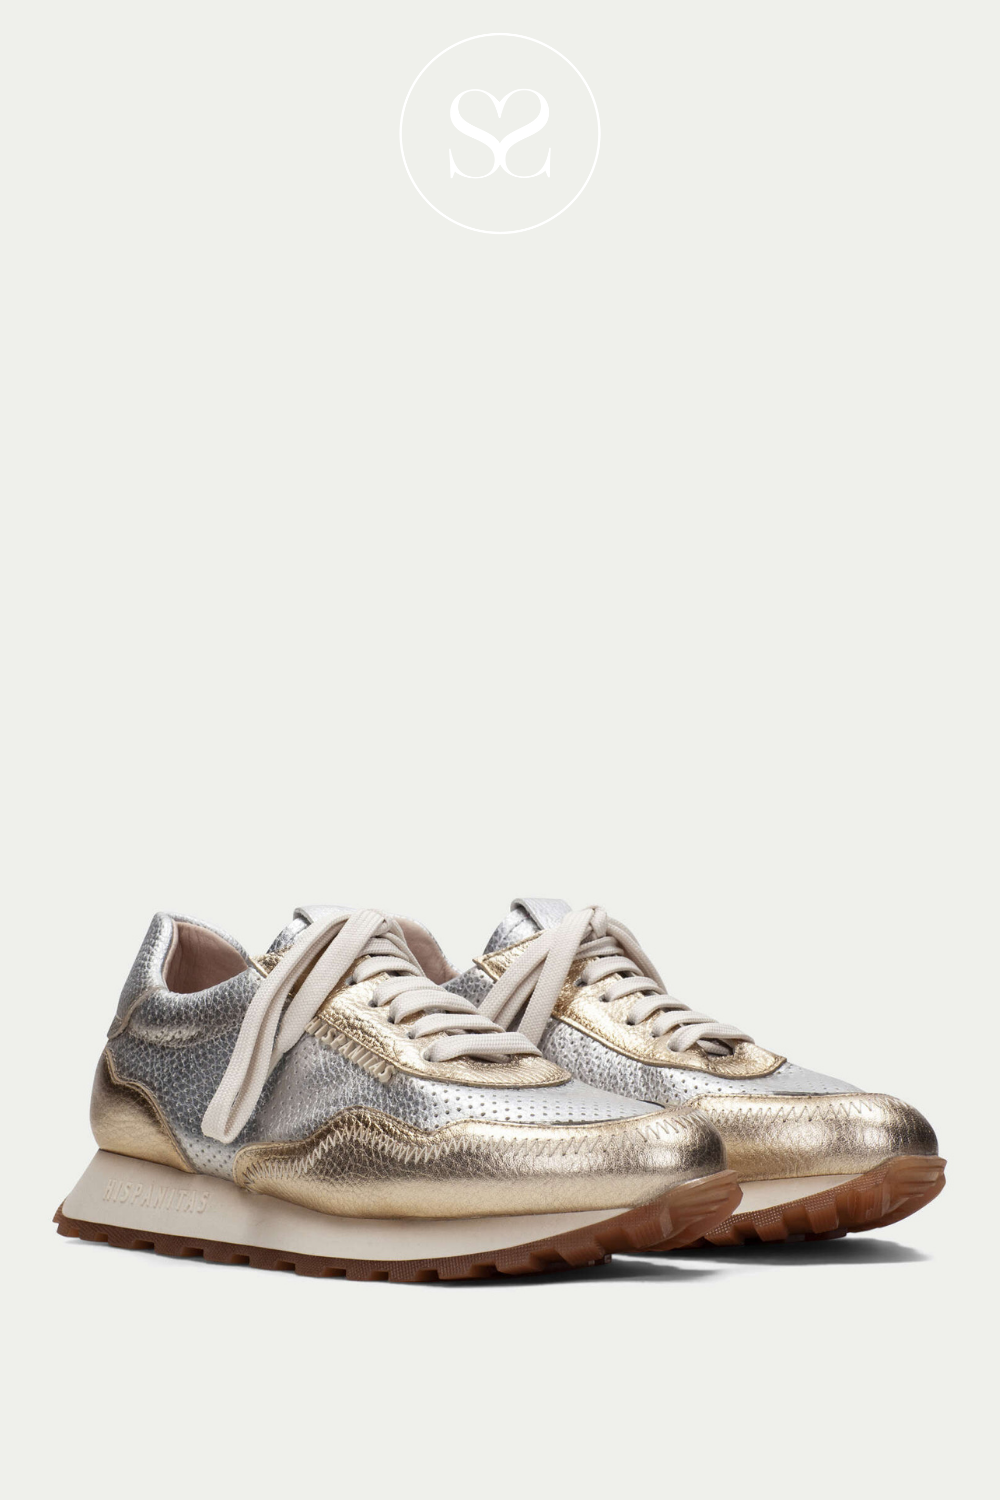 HISPANITAS HV243392 METALLIC SILVER AND GOLD LACED TRAINERS